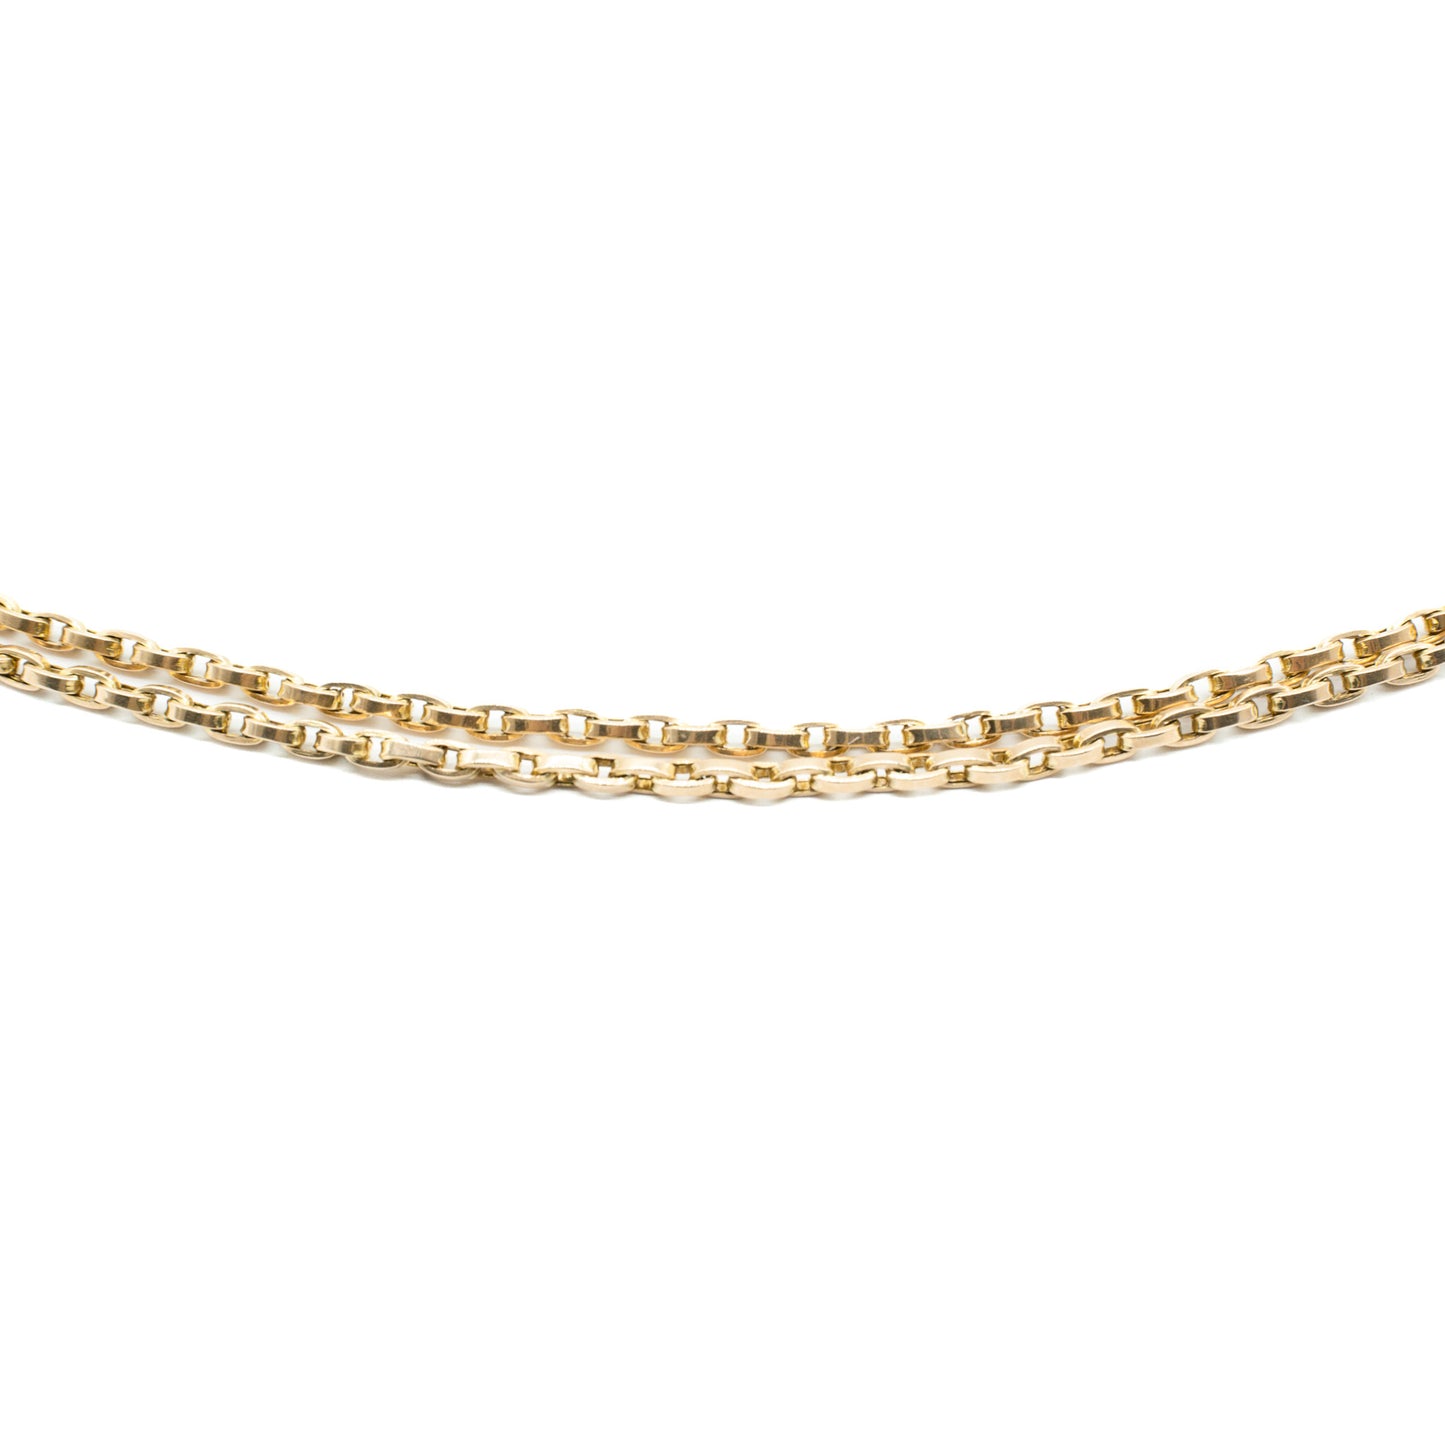 Classic 15ct rose gold Victorian box link chain with a double dog-clip clasp. Long enough to comfortably be worn as a triple chain.